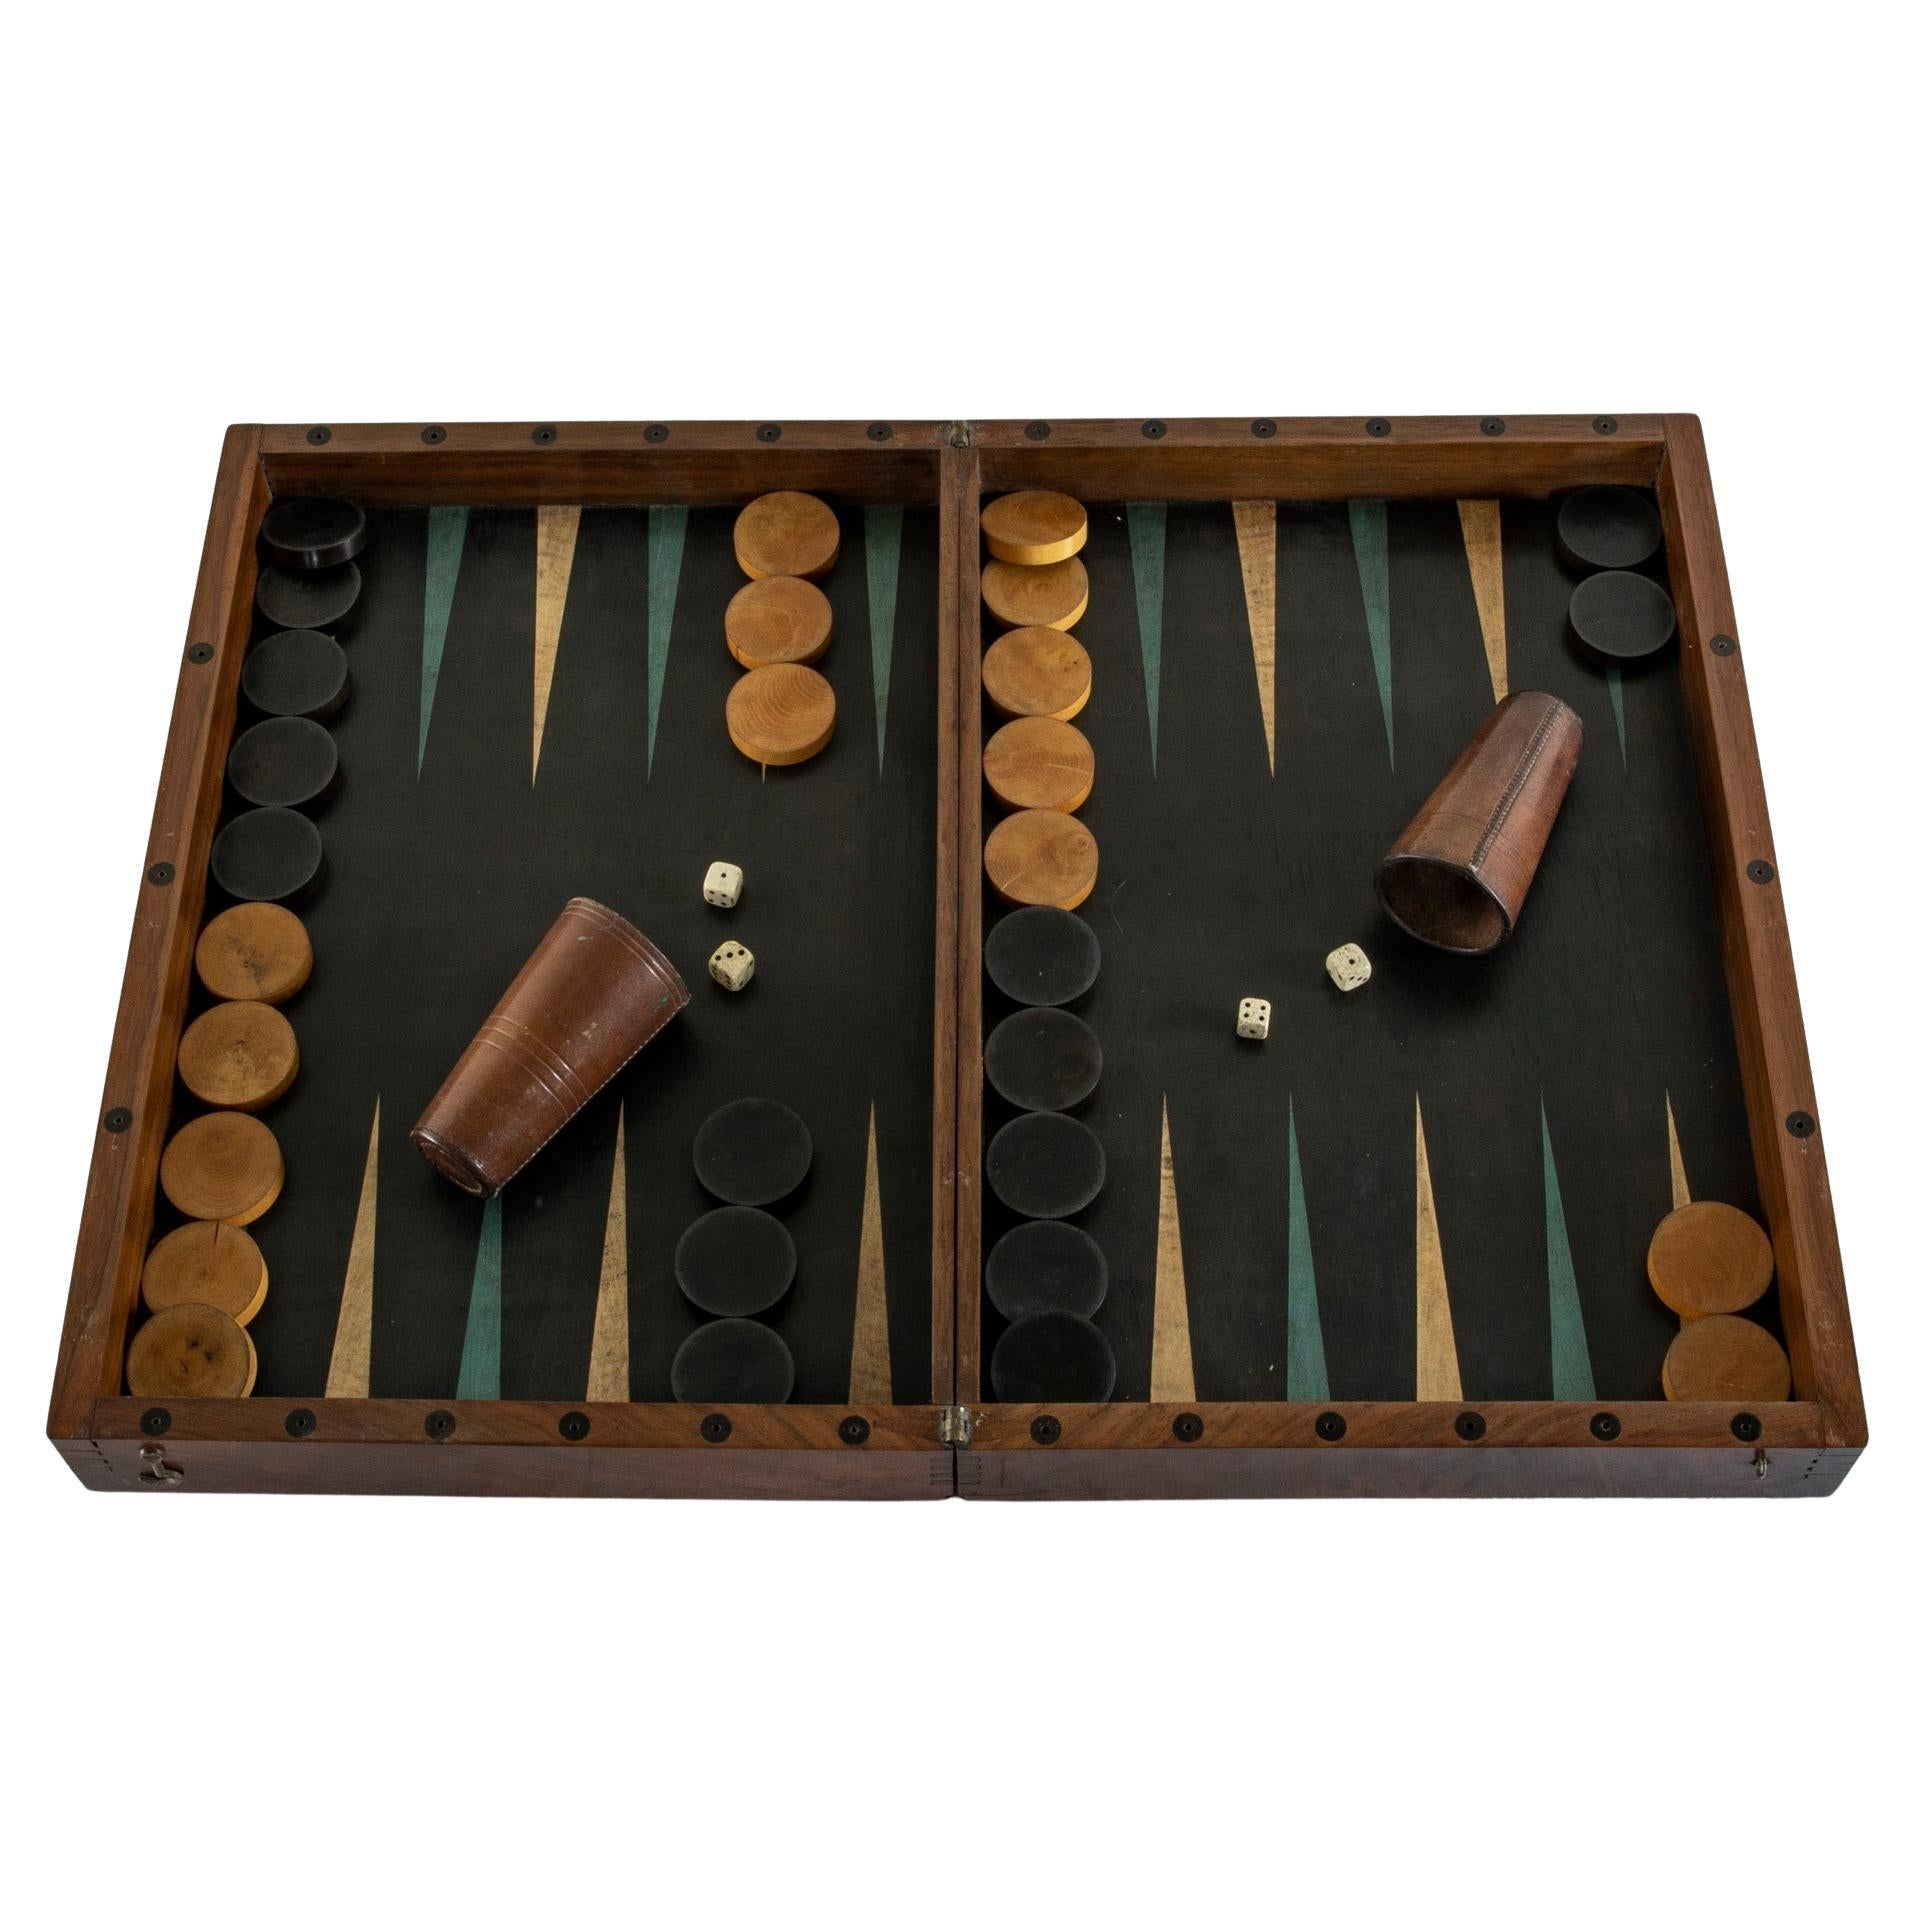 19th Century, Walnut Marquetry Folding Game Box for Chess, Checkers, Backgammon